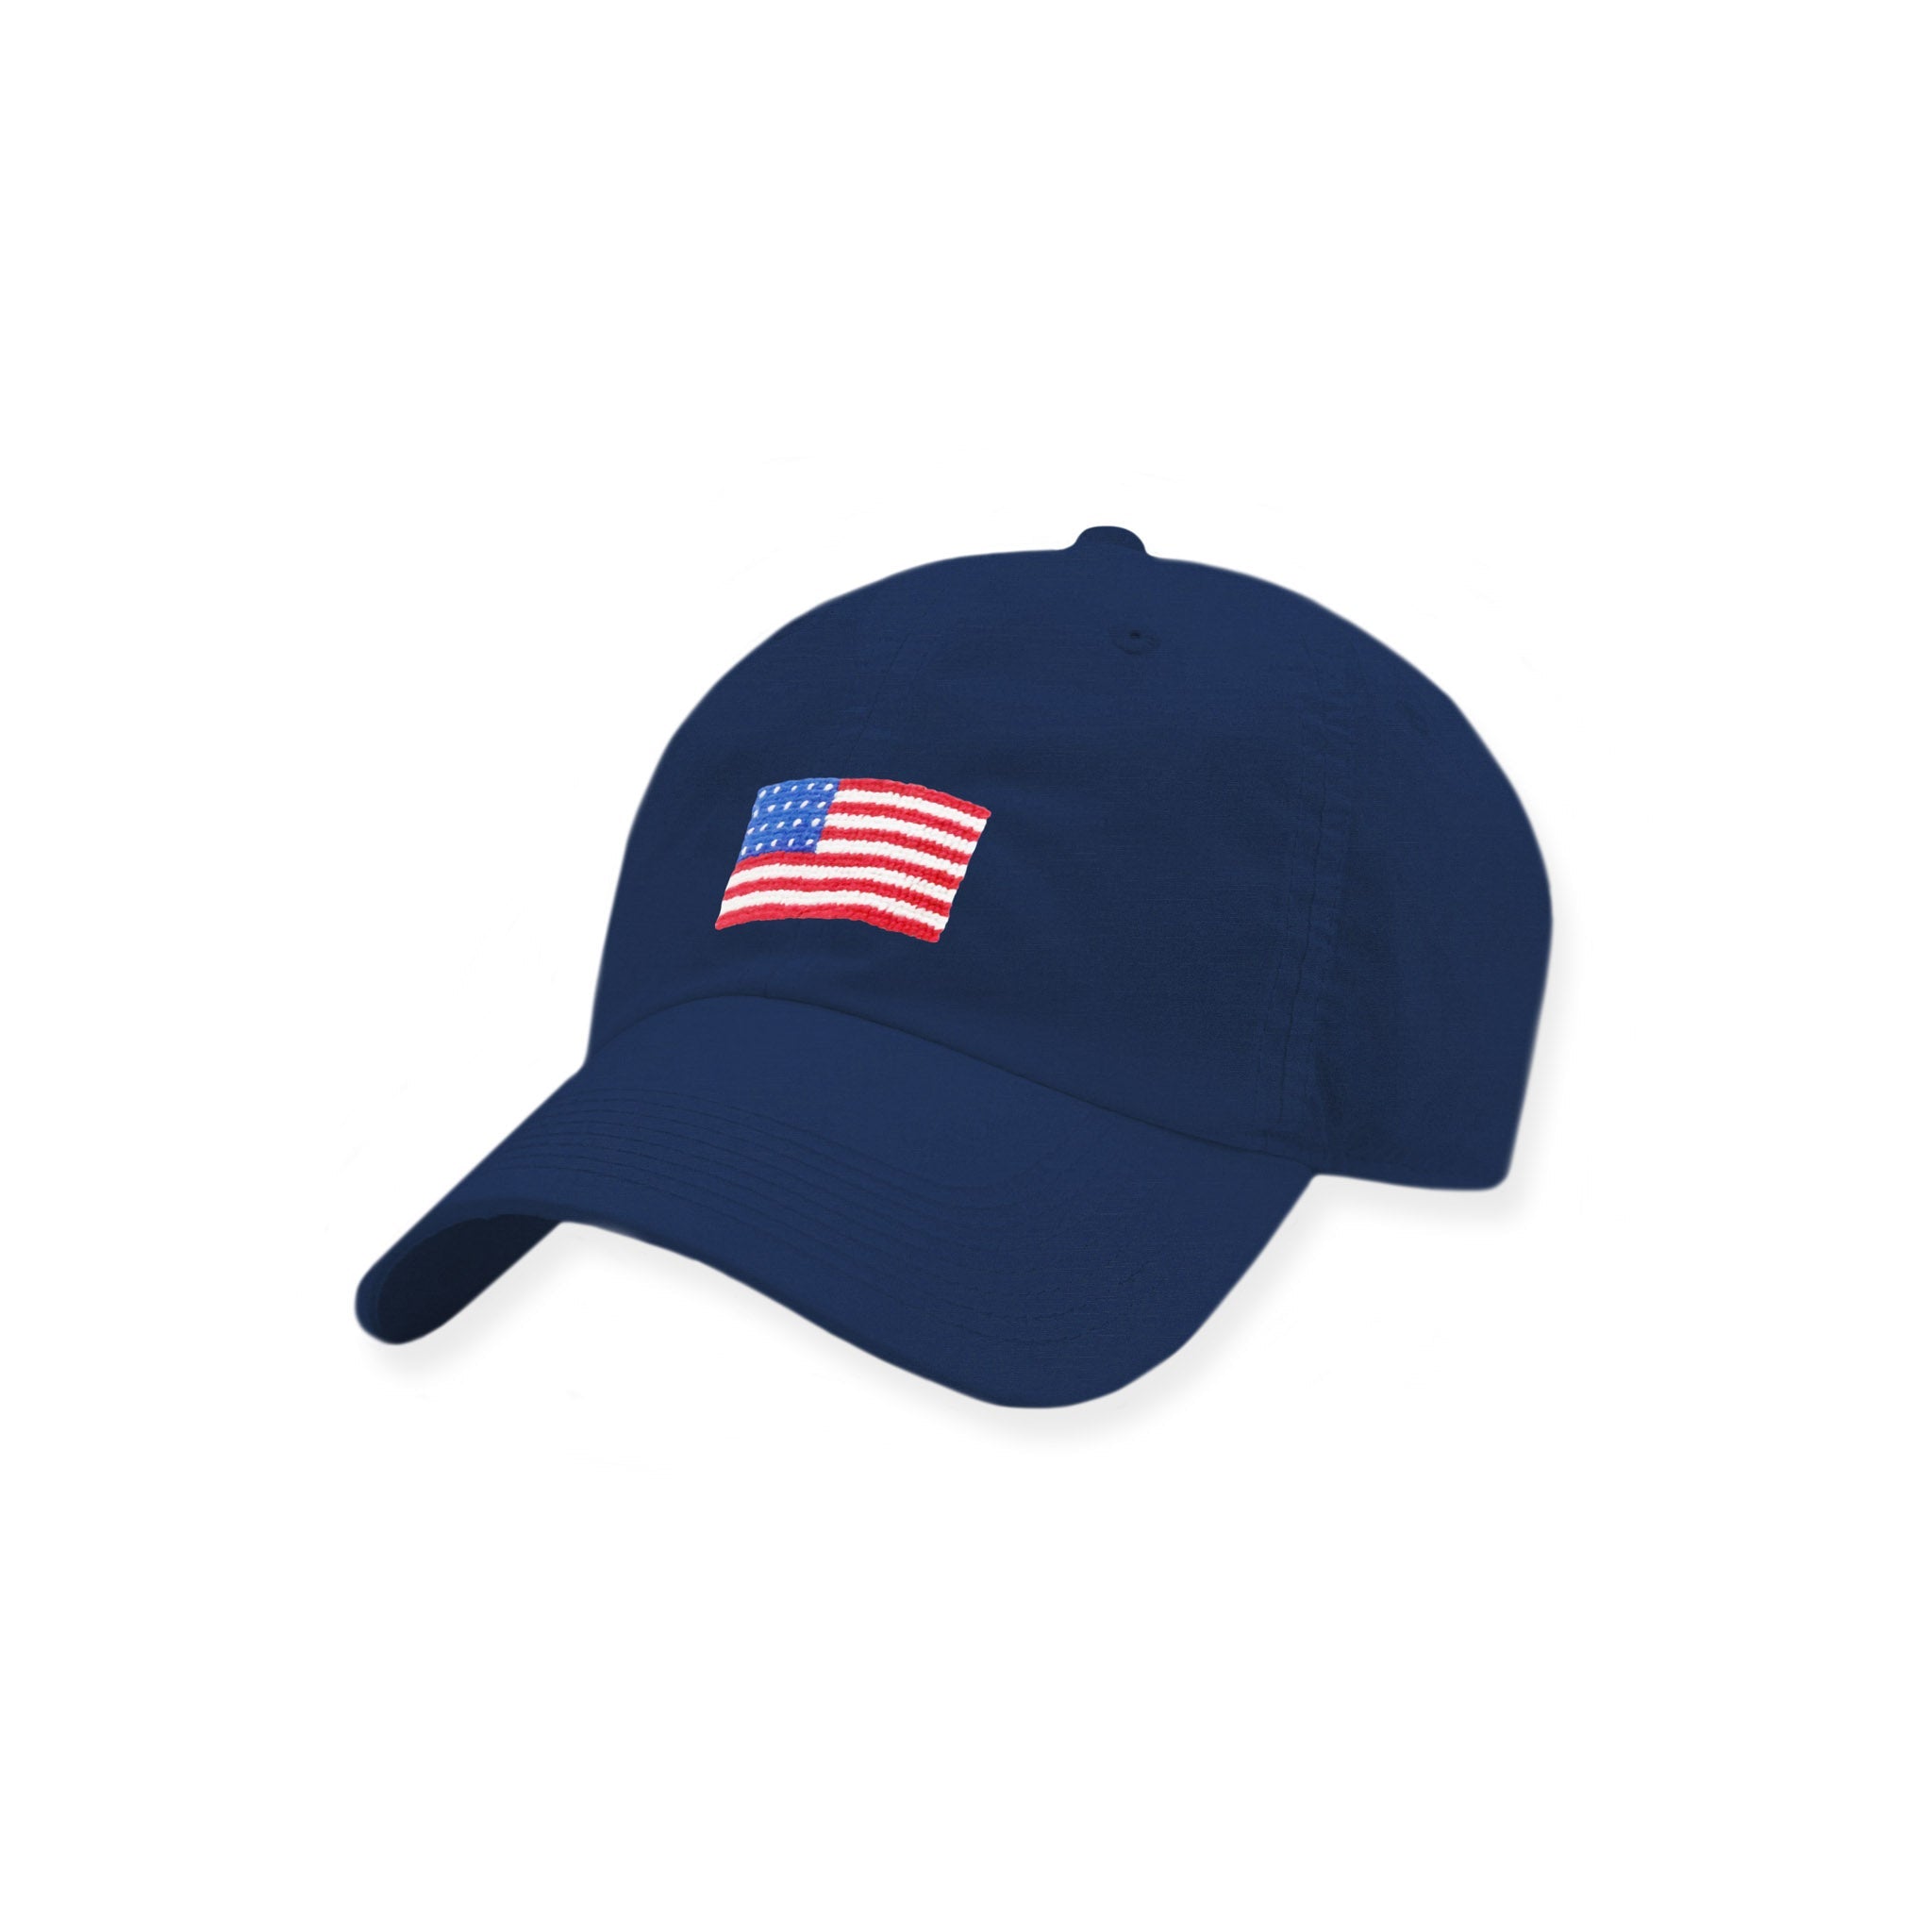 American Flag Performance Hat (Navy) at Smathers and Branson